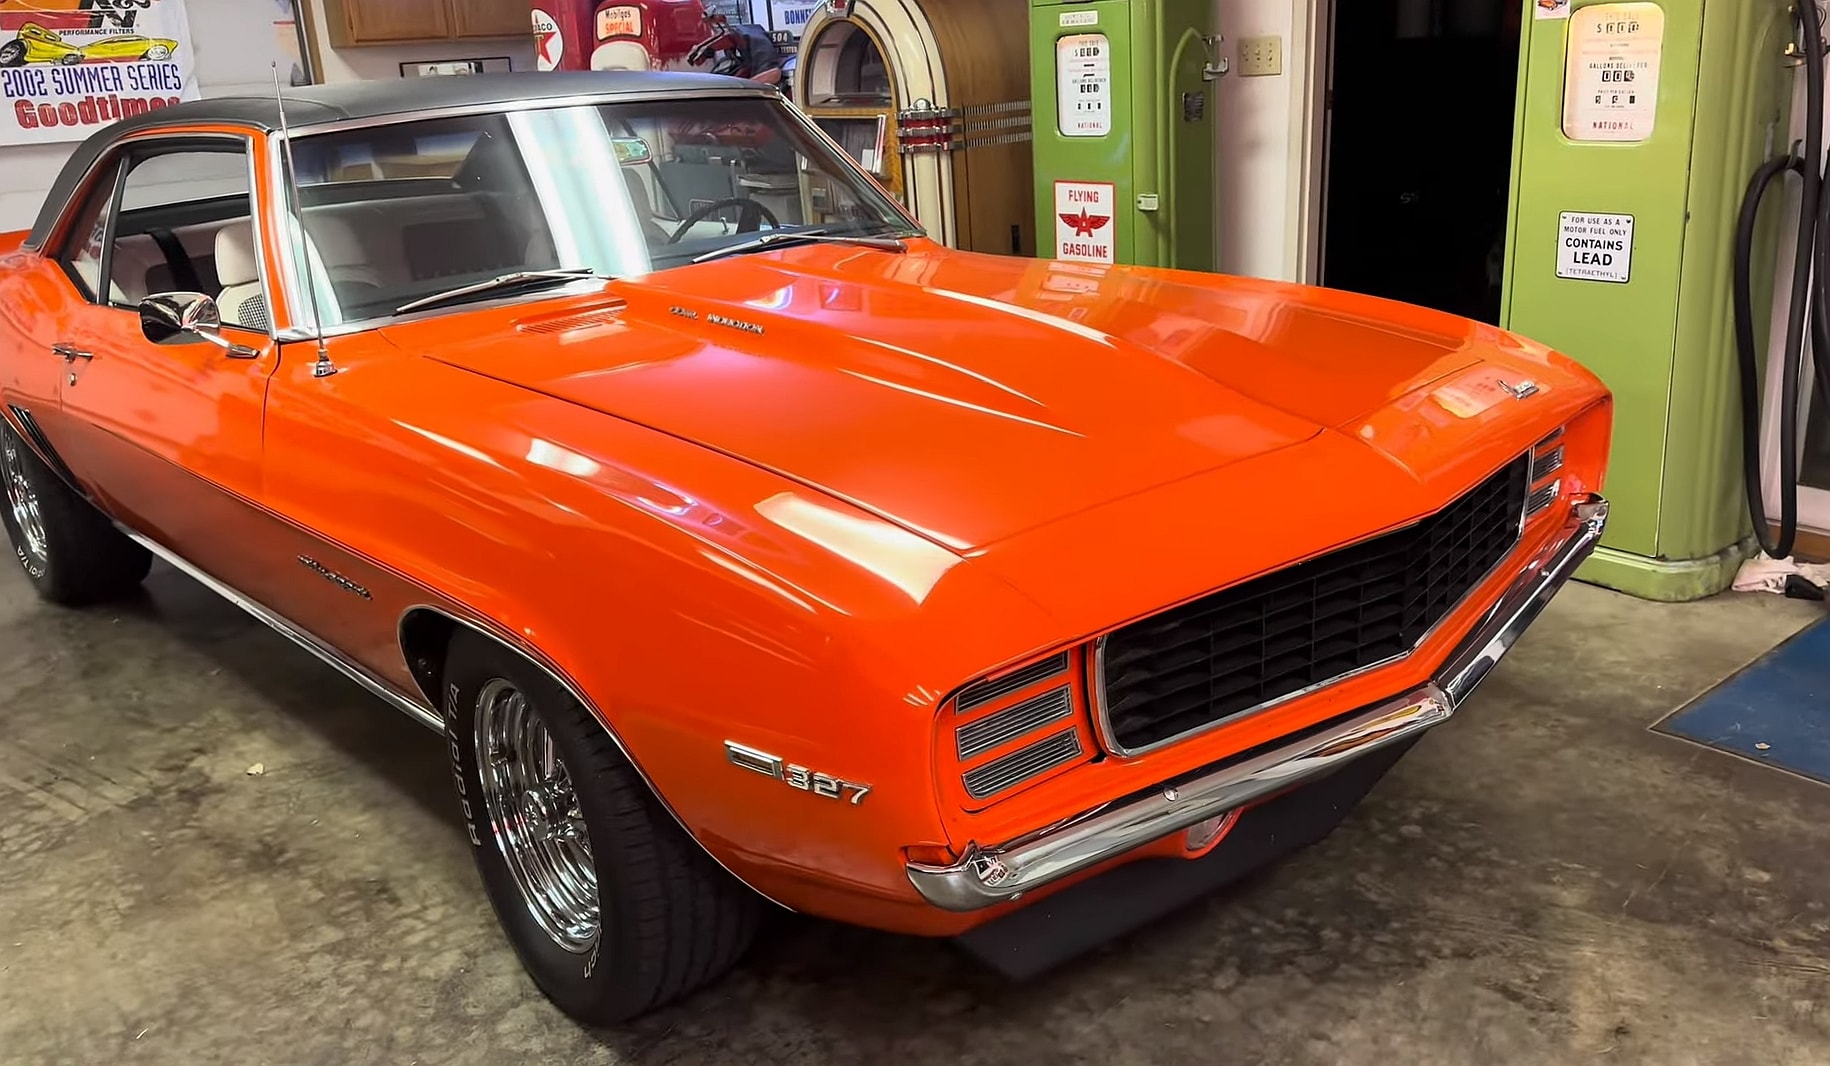 Rare Features of the 1969 Camaro RS